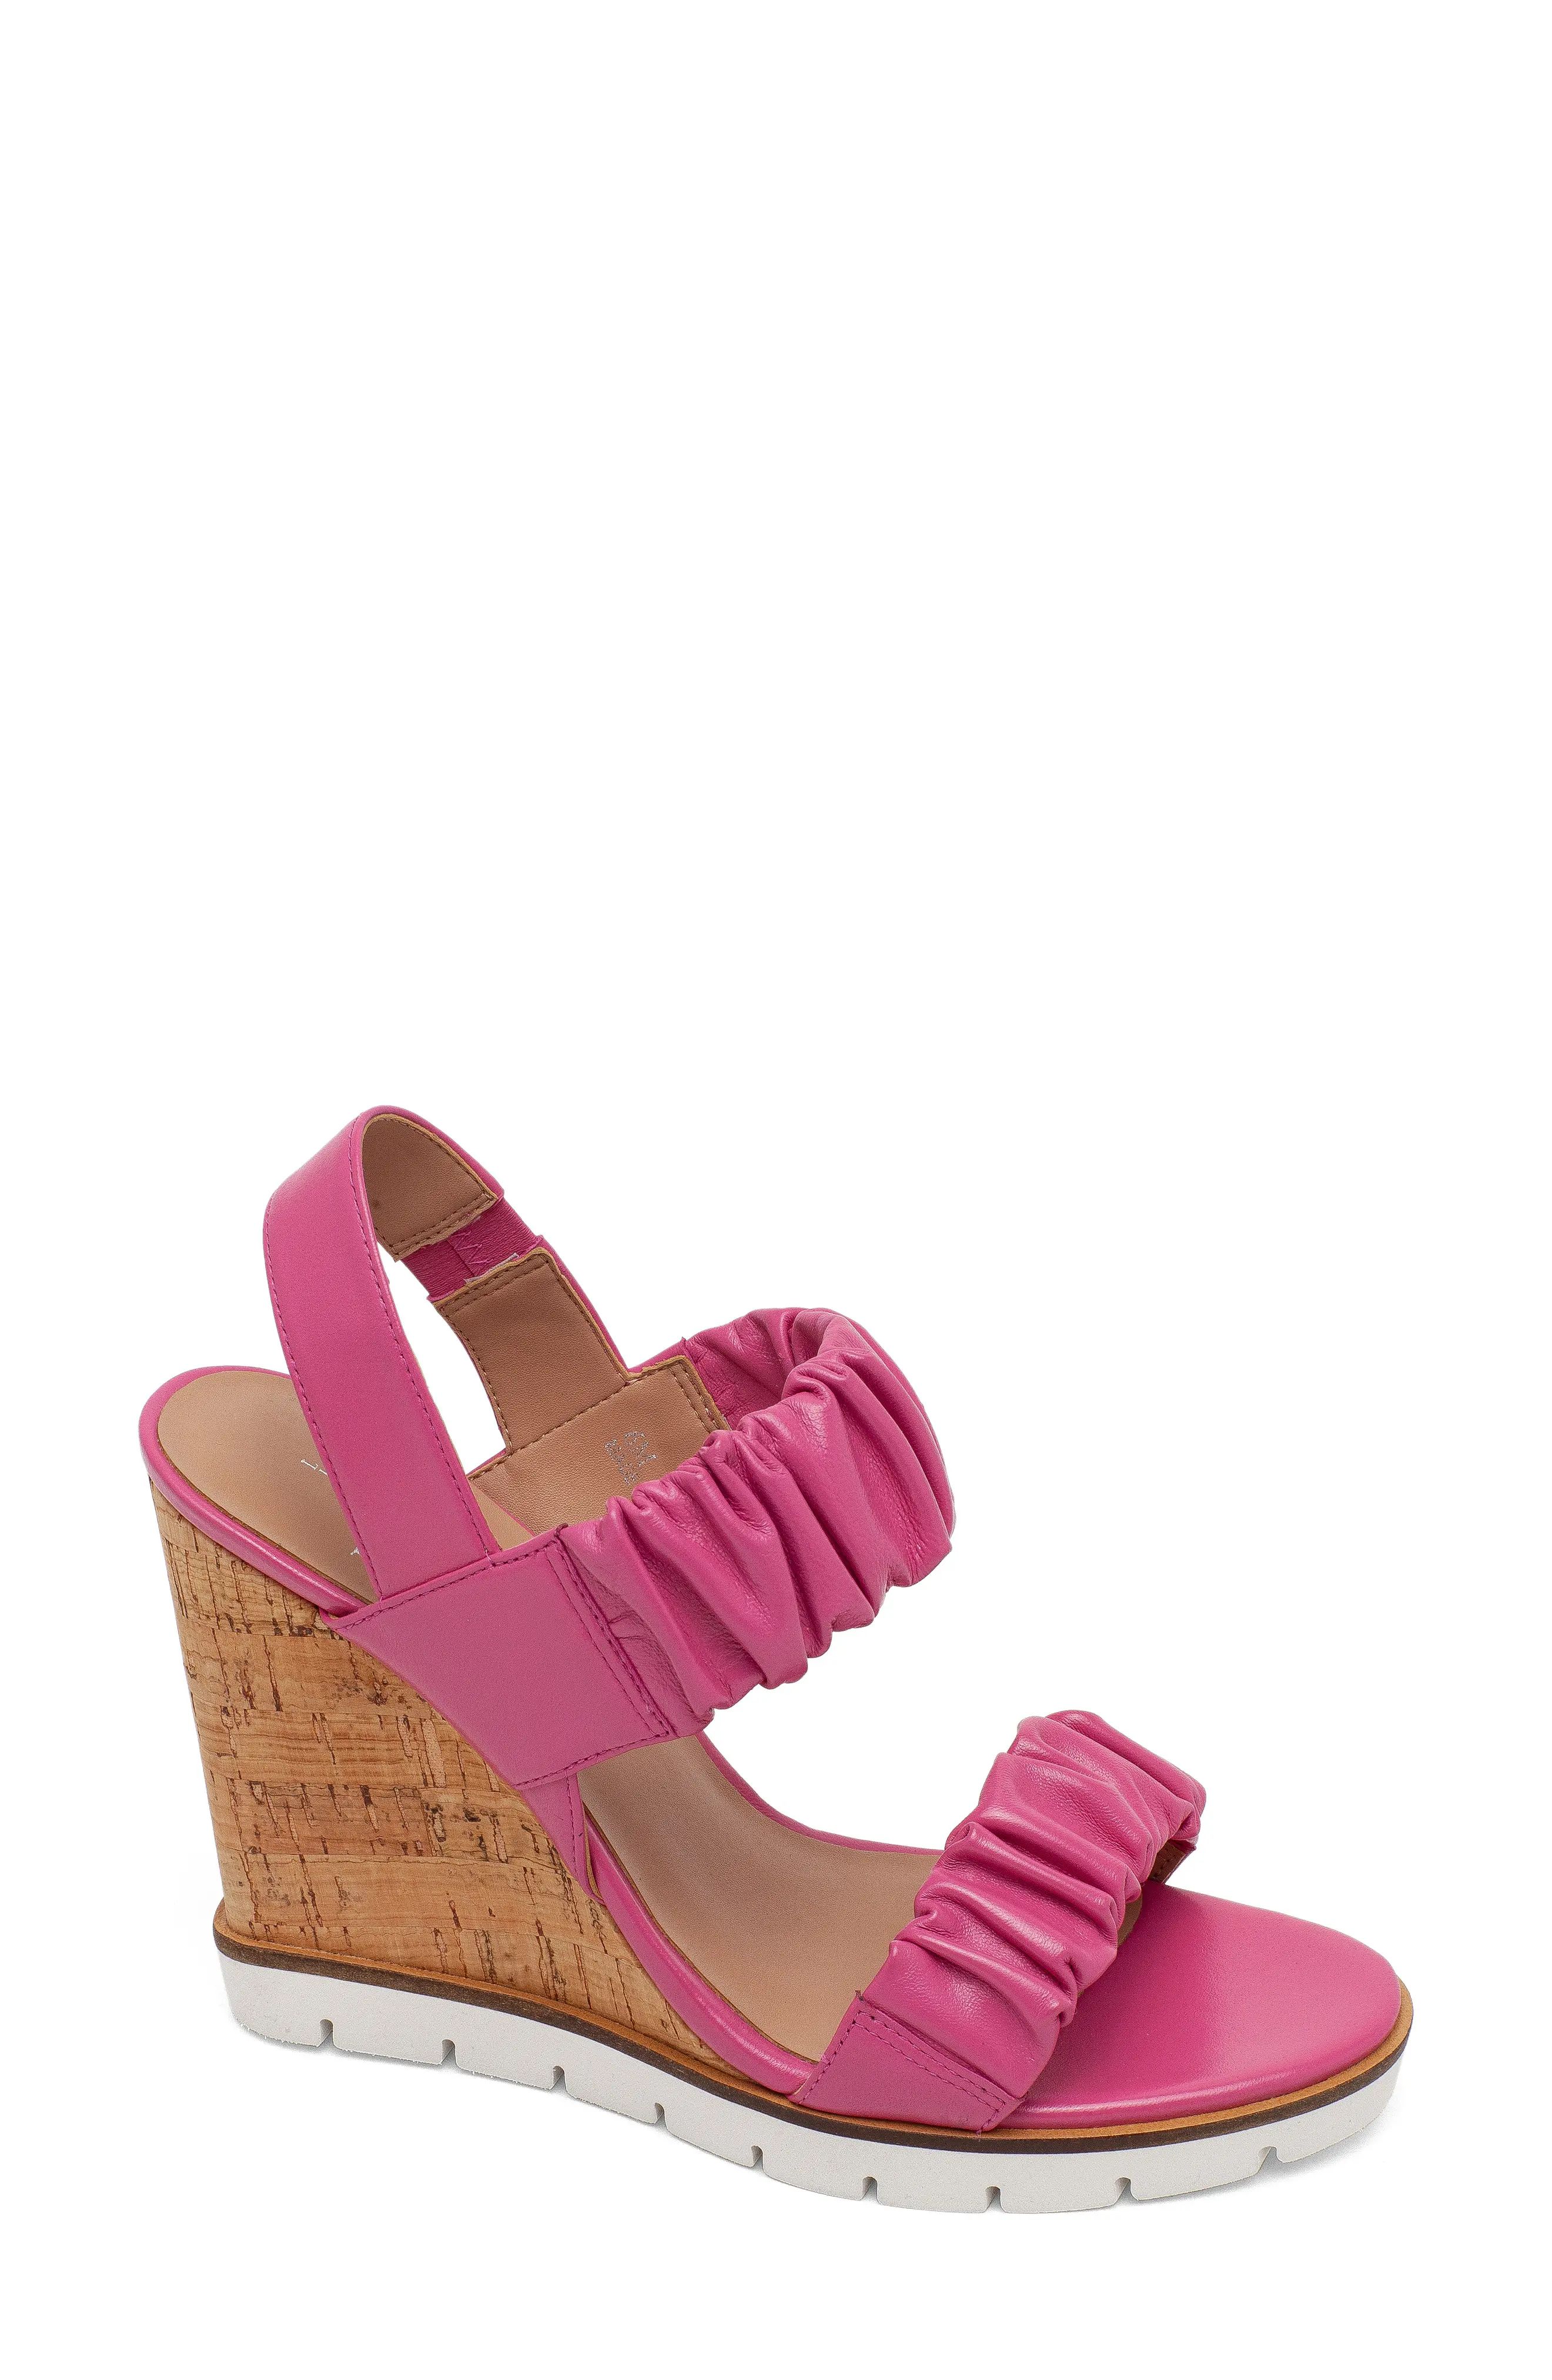 Linea Paolo Estelle Slingback Sandal in Hot Pink Leather at Nordstrom, Size 8.5 | Nordstrom